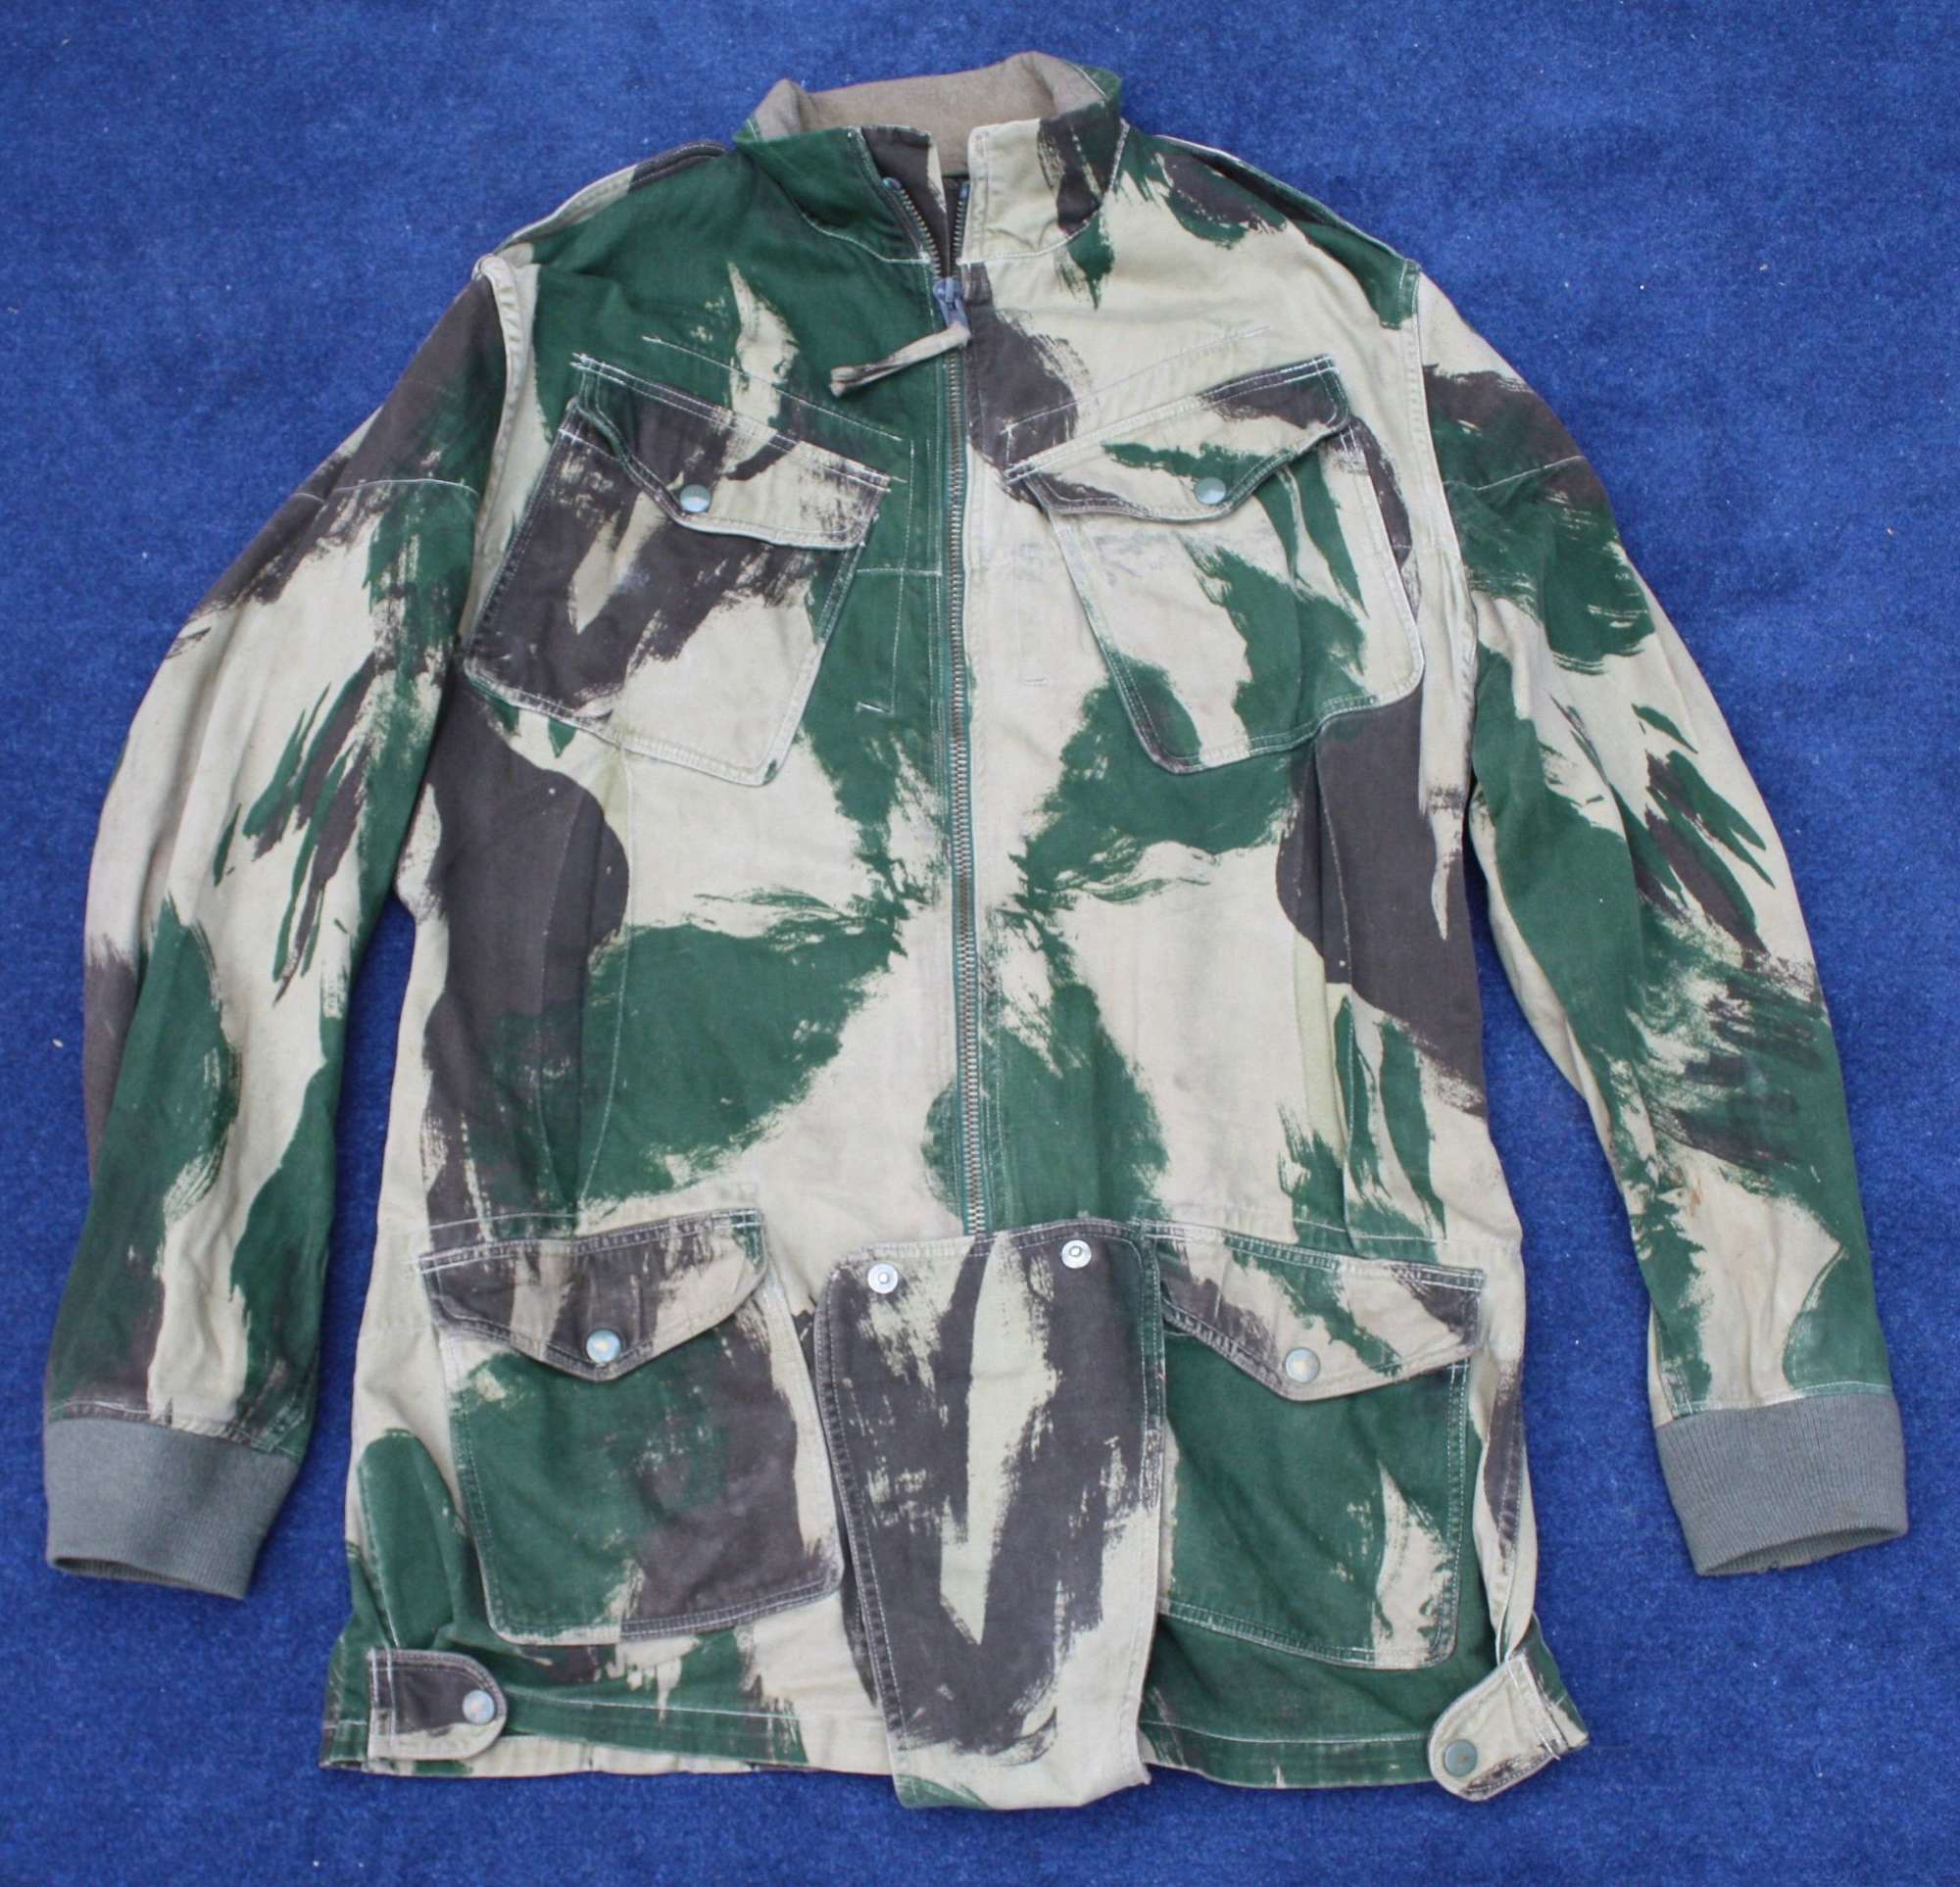 1959 Pattern Camouflage Denison Smock Size 7. Very Good Condition.